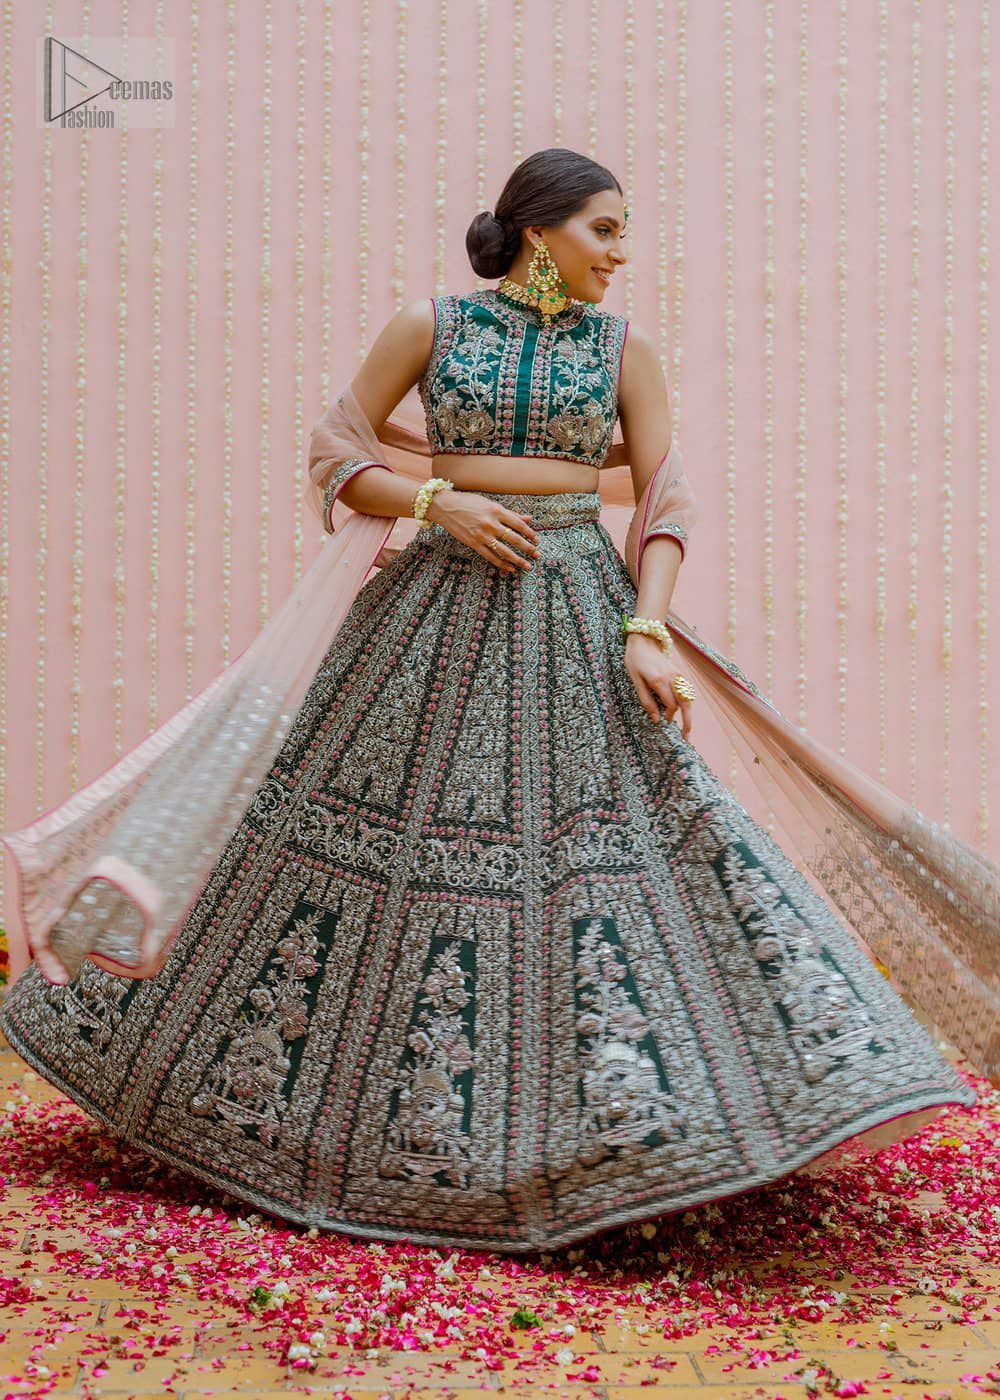 Bottle Green Velvet Blouse Lehenga Tan Dupatta. This dress is beautifully sculptured with floral embroidery, adorned with silver kora, dabka, pearl and sequins work all over.